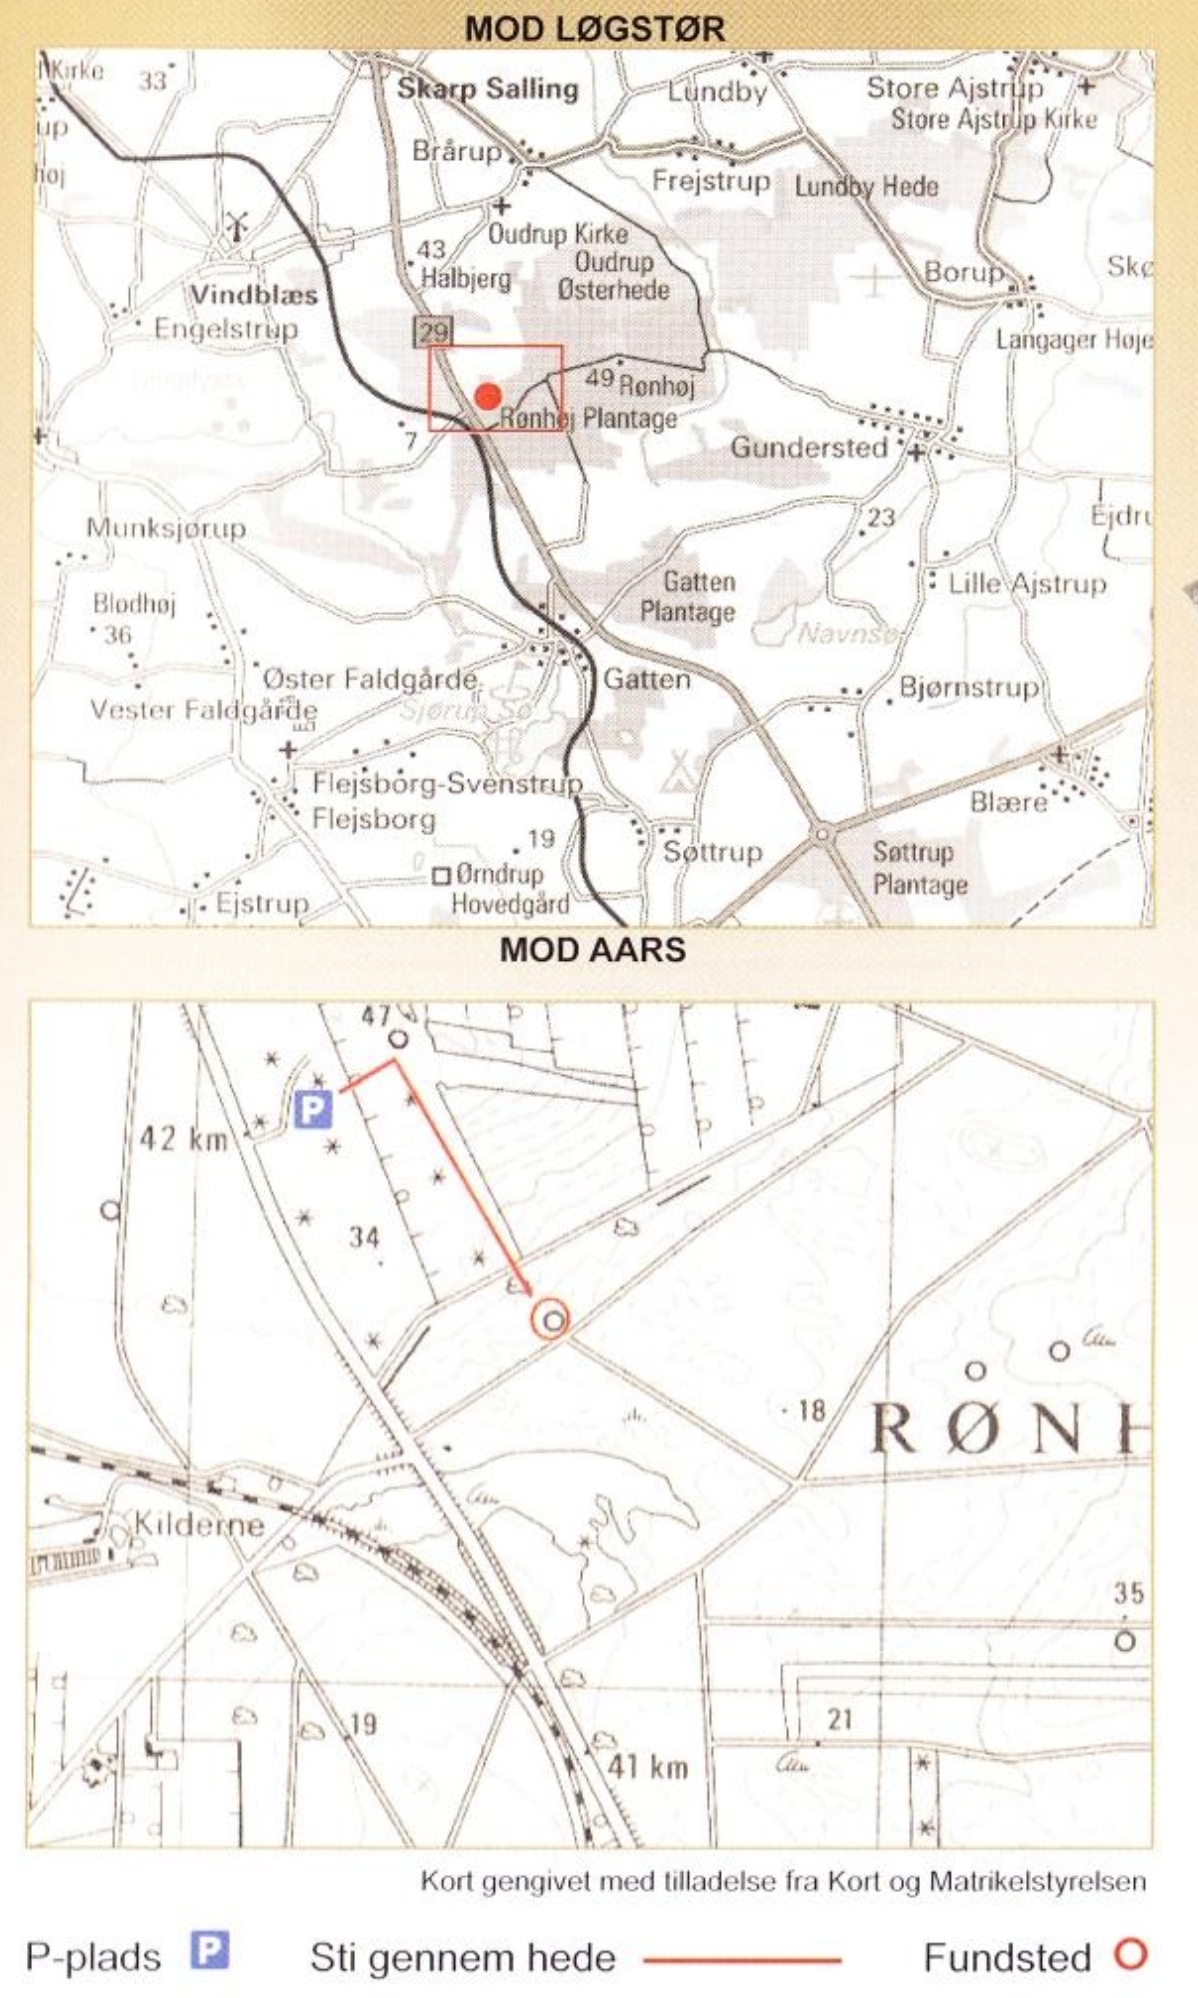 Map showing location where the Skarpsalling bowl was discovered.